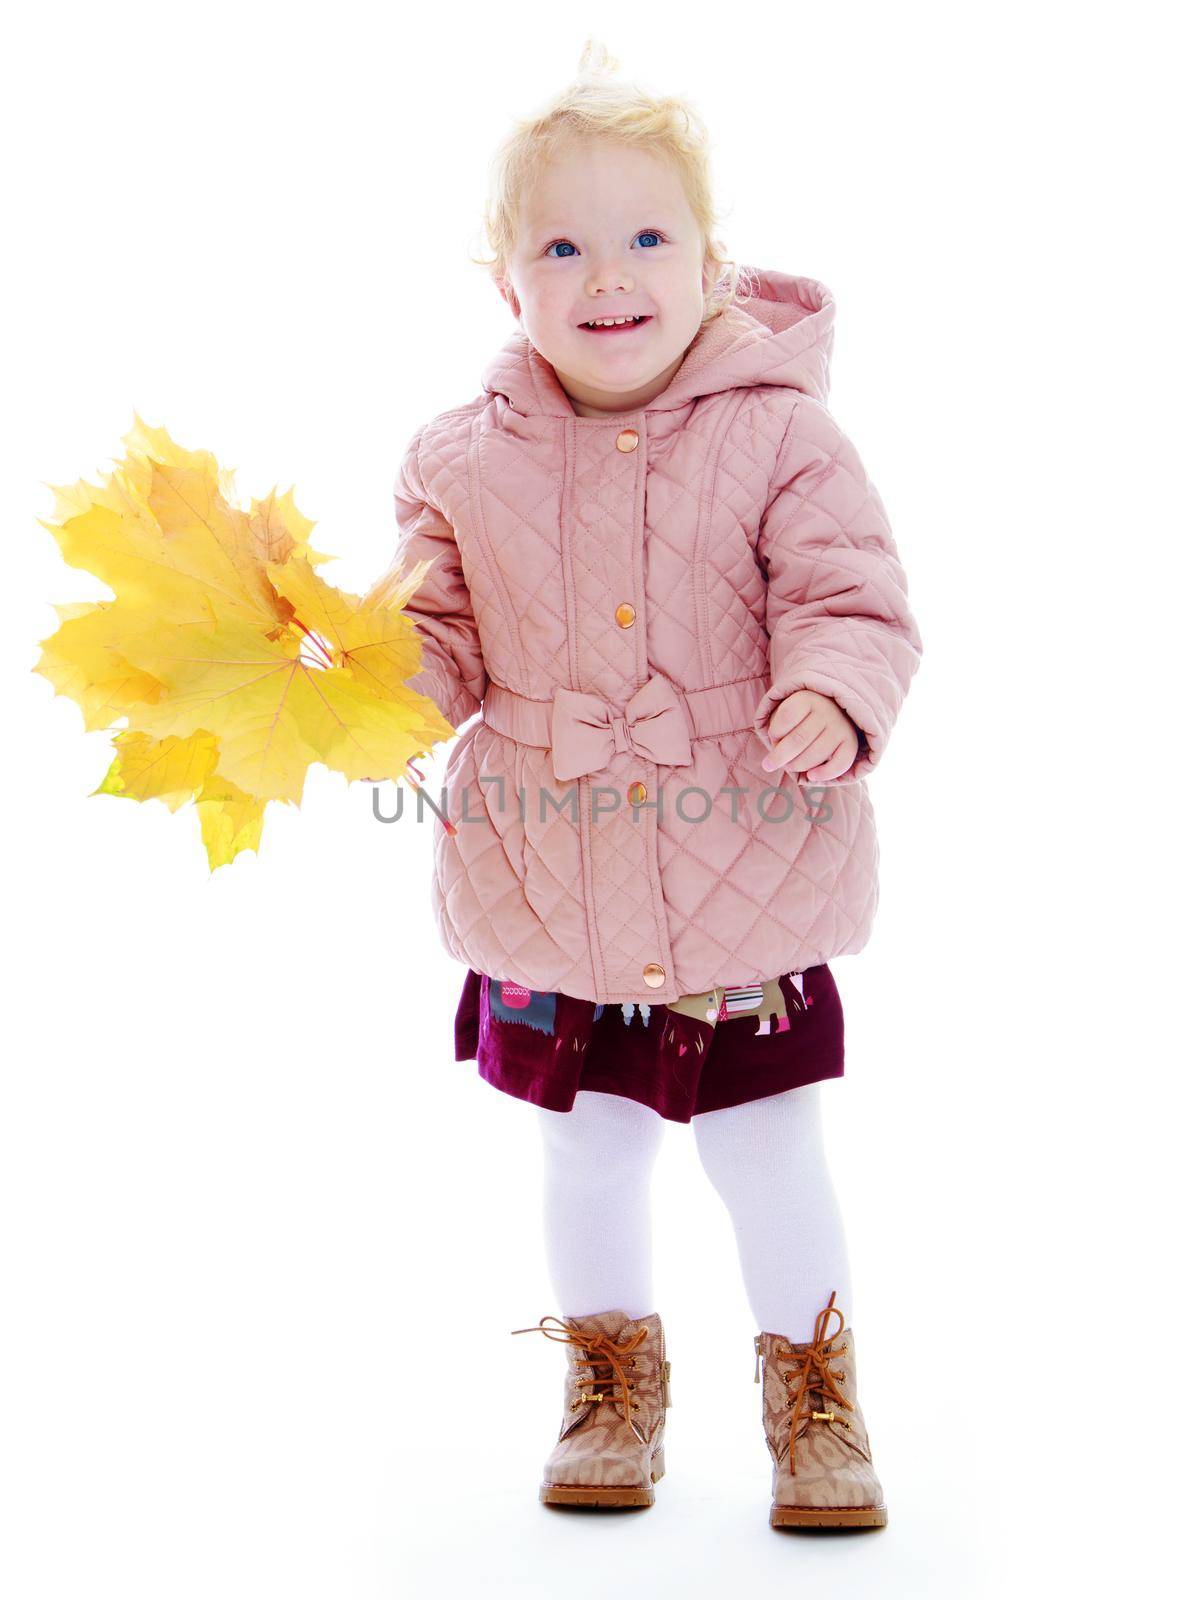 Adorable little girl in autumn coat holding a maple leaf.